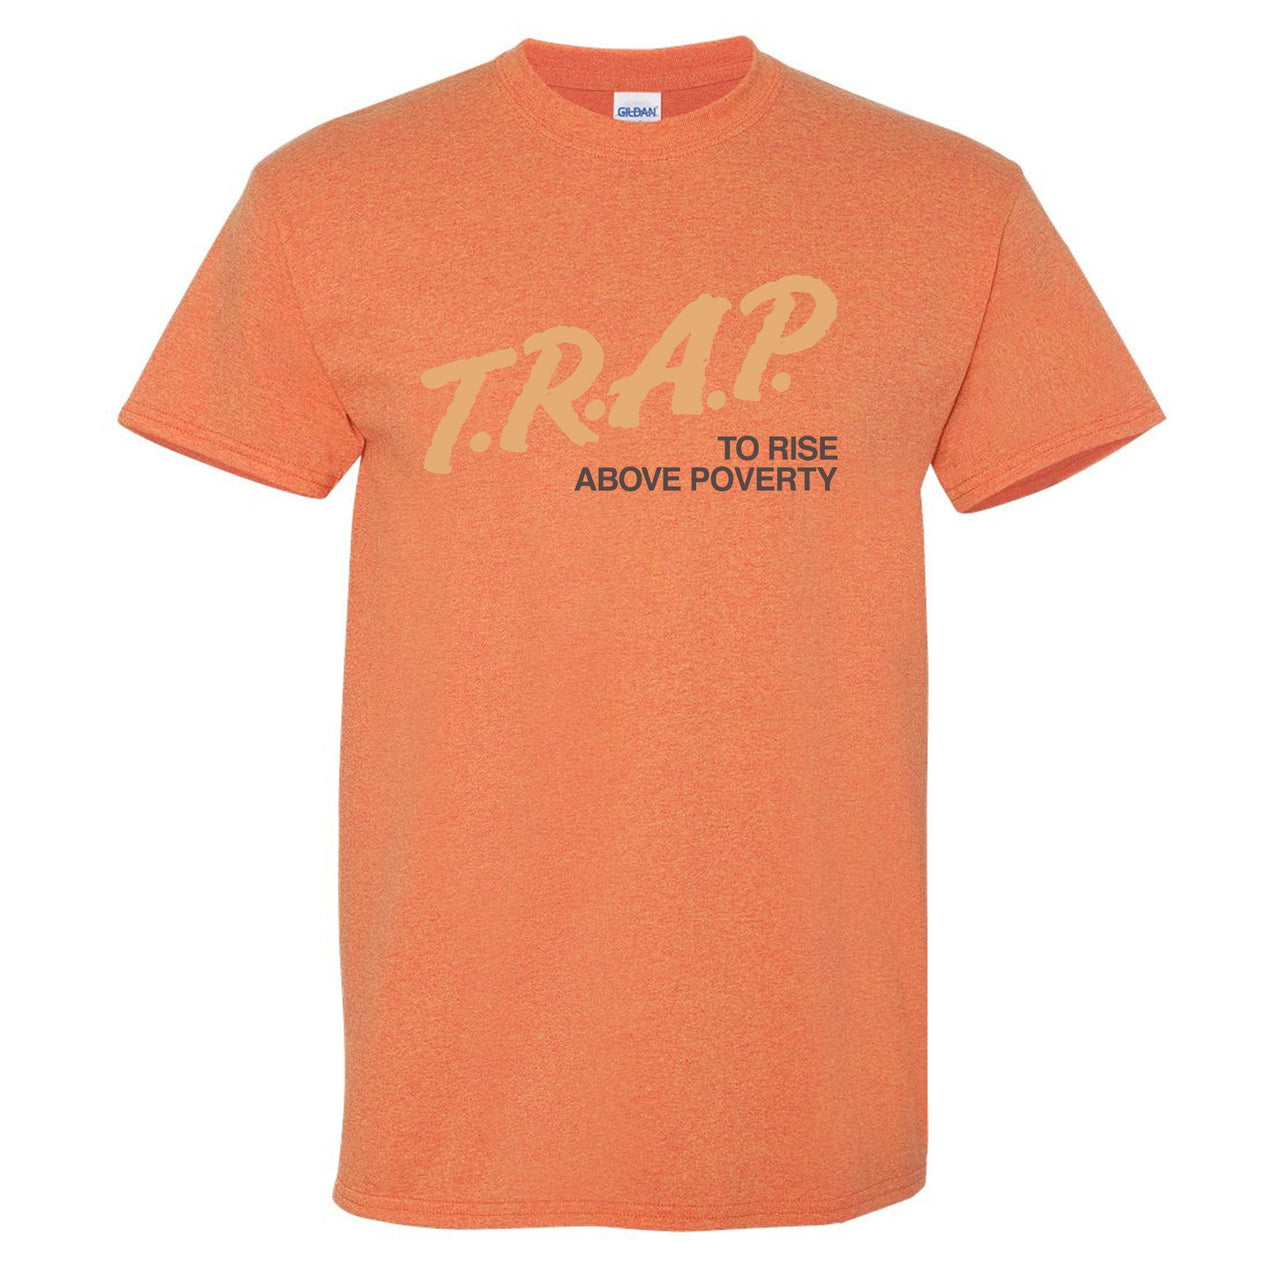 Clay v2 350s T Shirt | Trap To Rise Above Poverty, Heathered Sunset